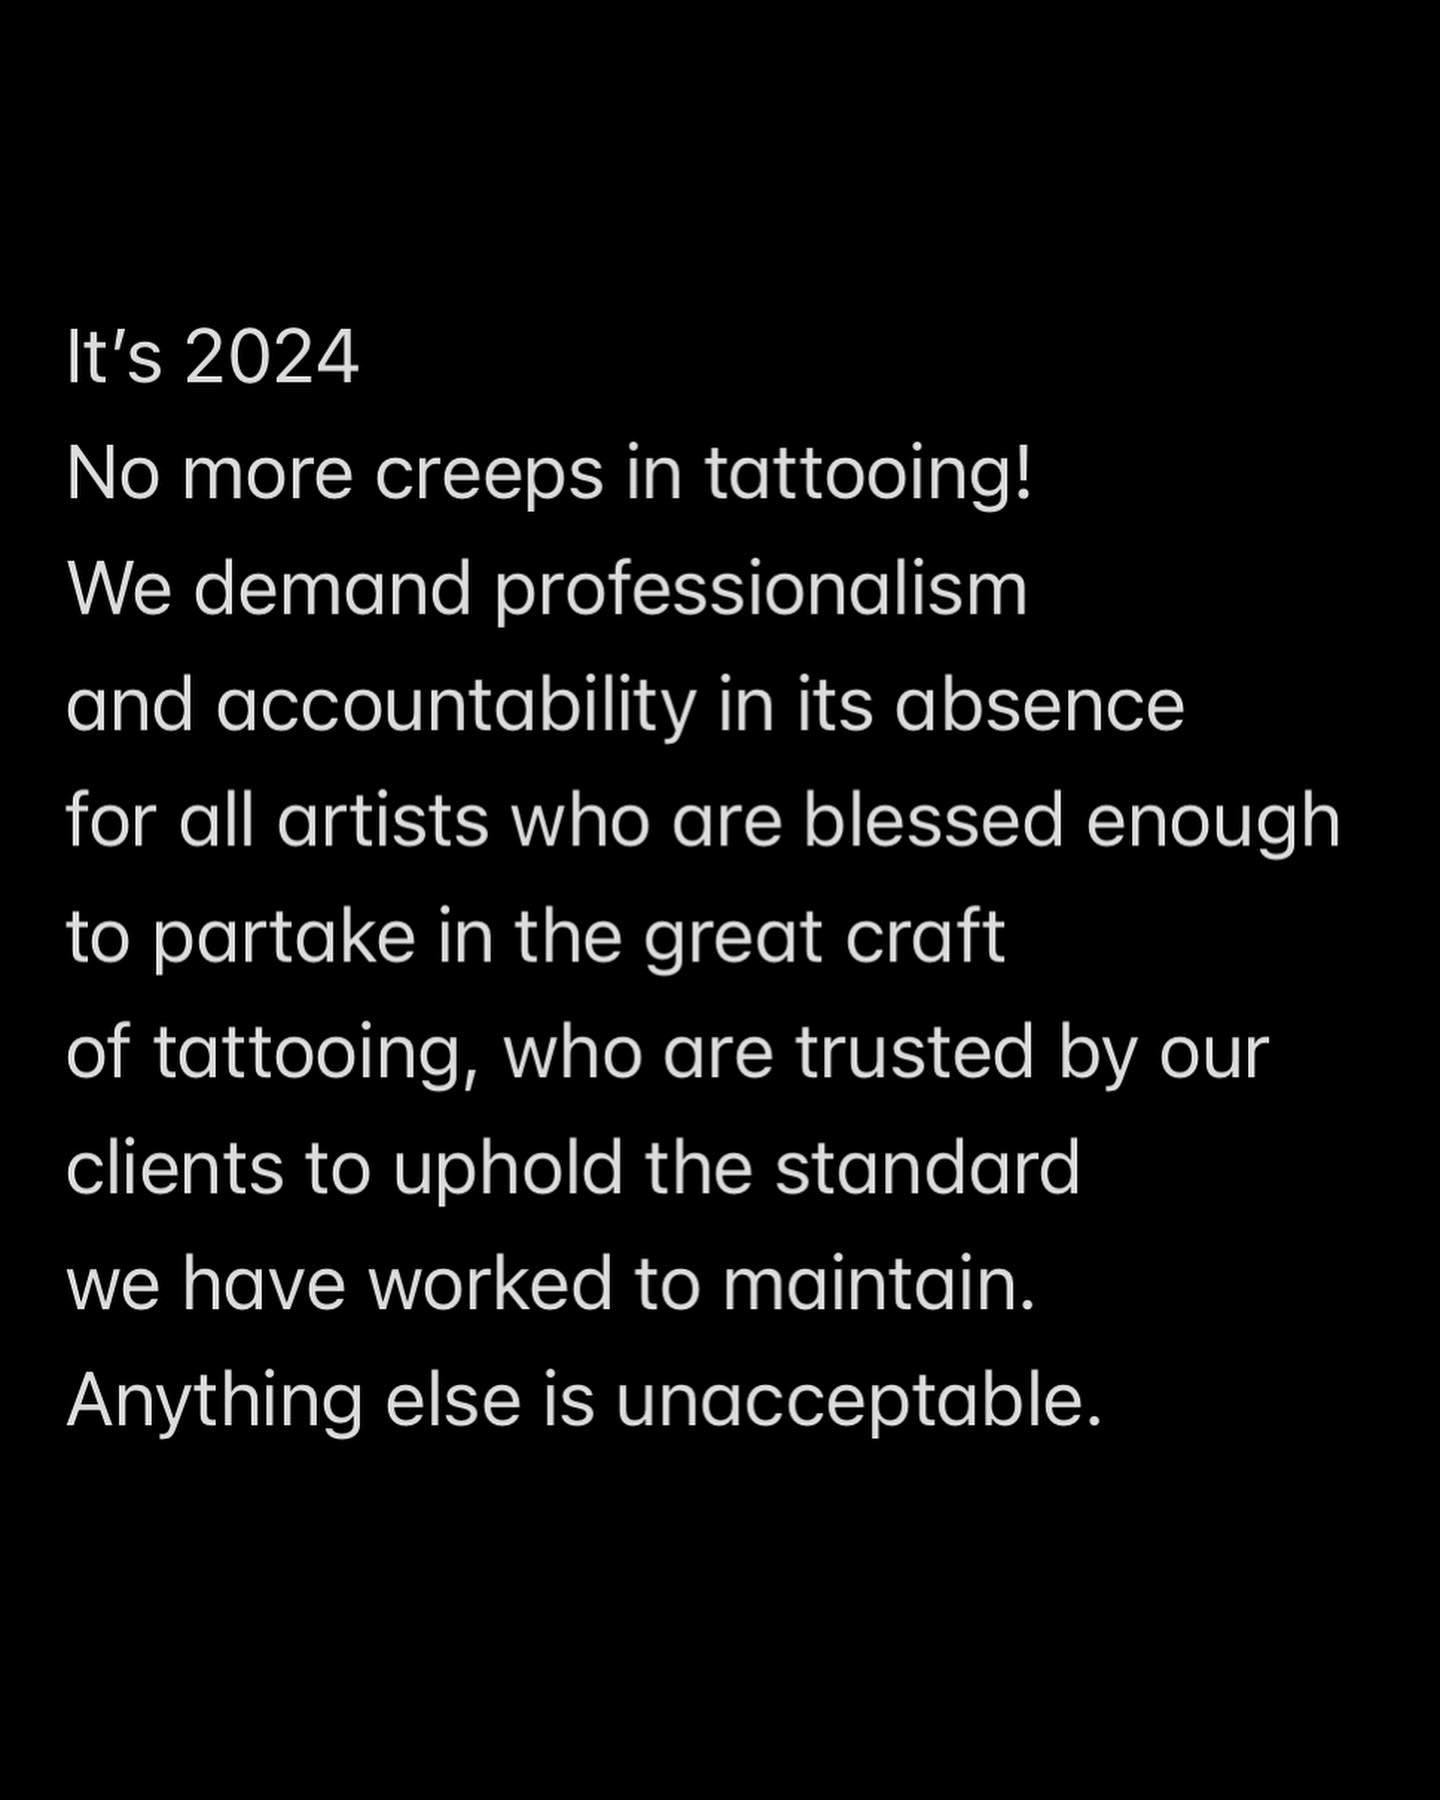 I can&rsquo;t express how sad 
moments like these make me.
But as a 20 year veteran of the tattoo industry
I&rsquo;m glad to finally see people feeling 
empowered and safe enough to speak out 
against unethical behavior.

💜